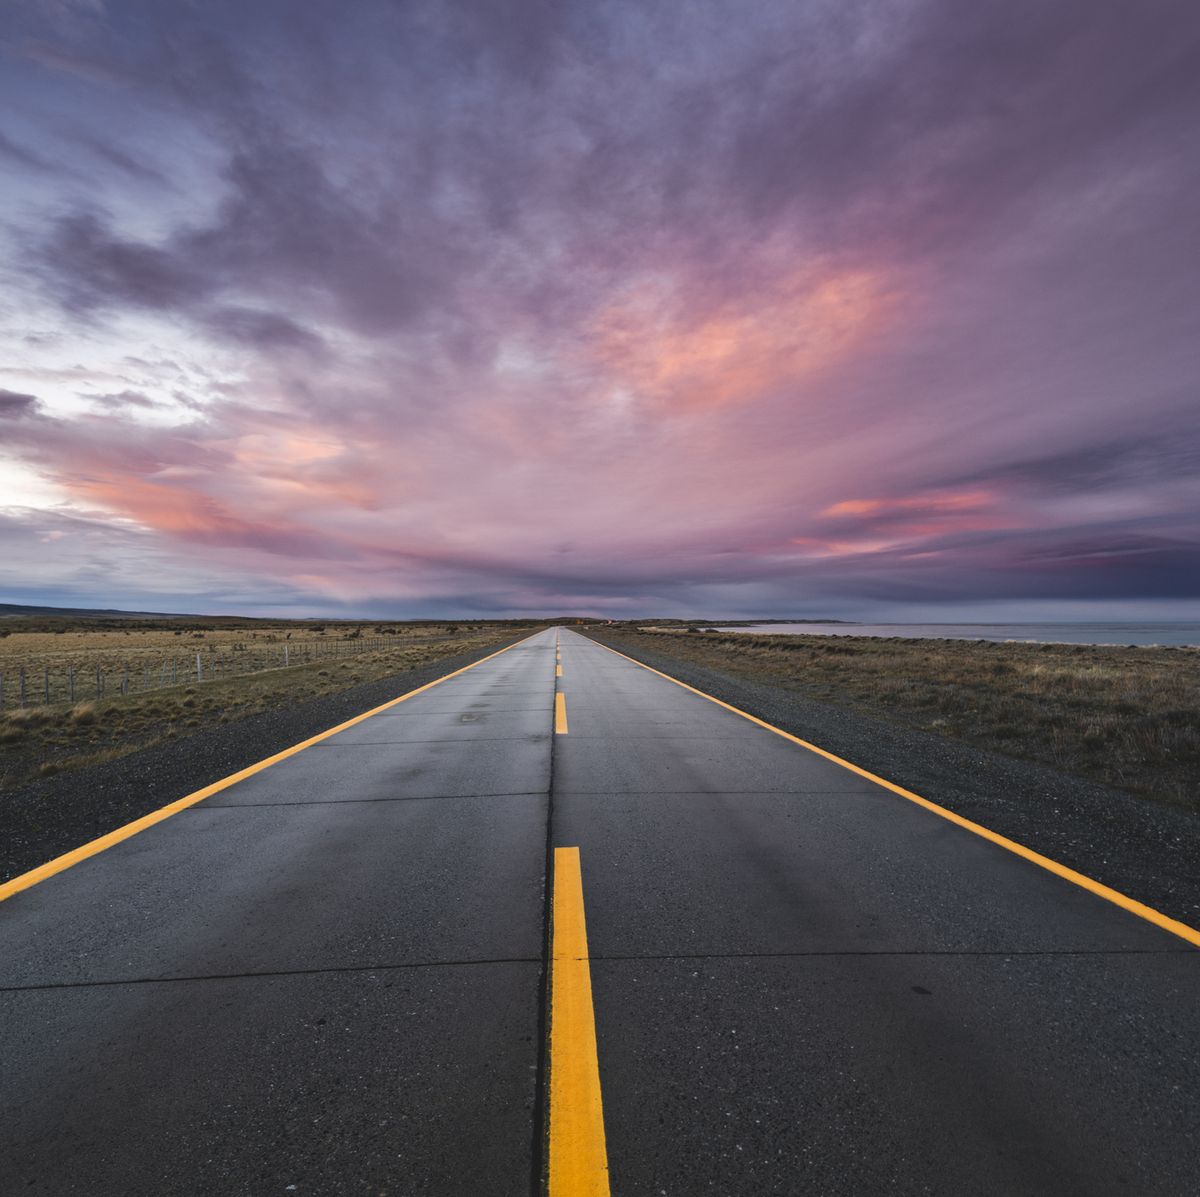 https://hips.hearstapps.com/hmg-prod/images/empty-paved-road-at-sunset-in-the-chilean-patagonia-royalty-free-image-1591901619.jpg?crop=0.669xw:1.00xh;0.147xw,0&resize=1200:*